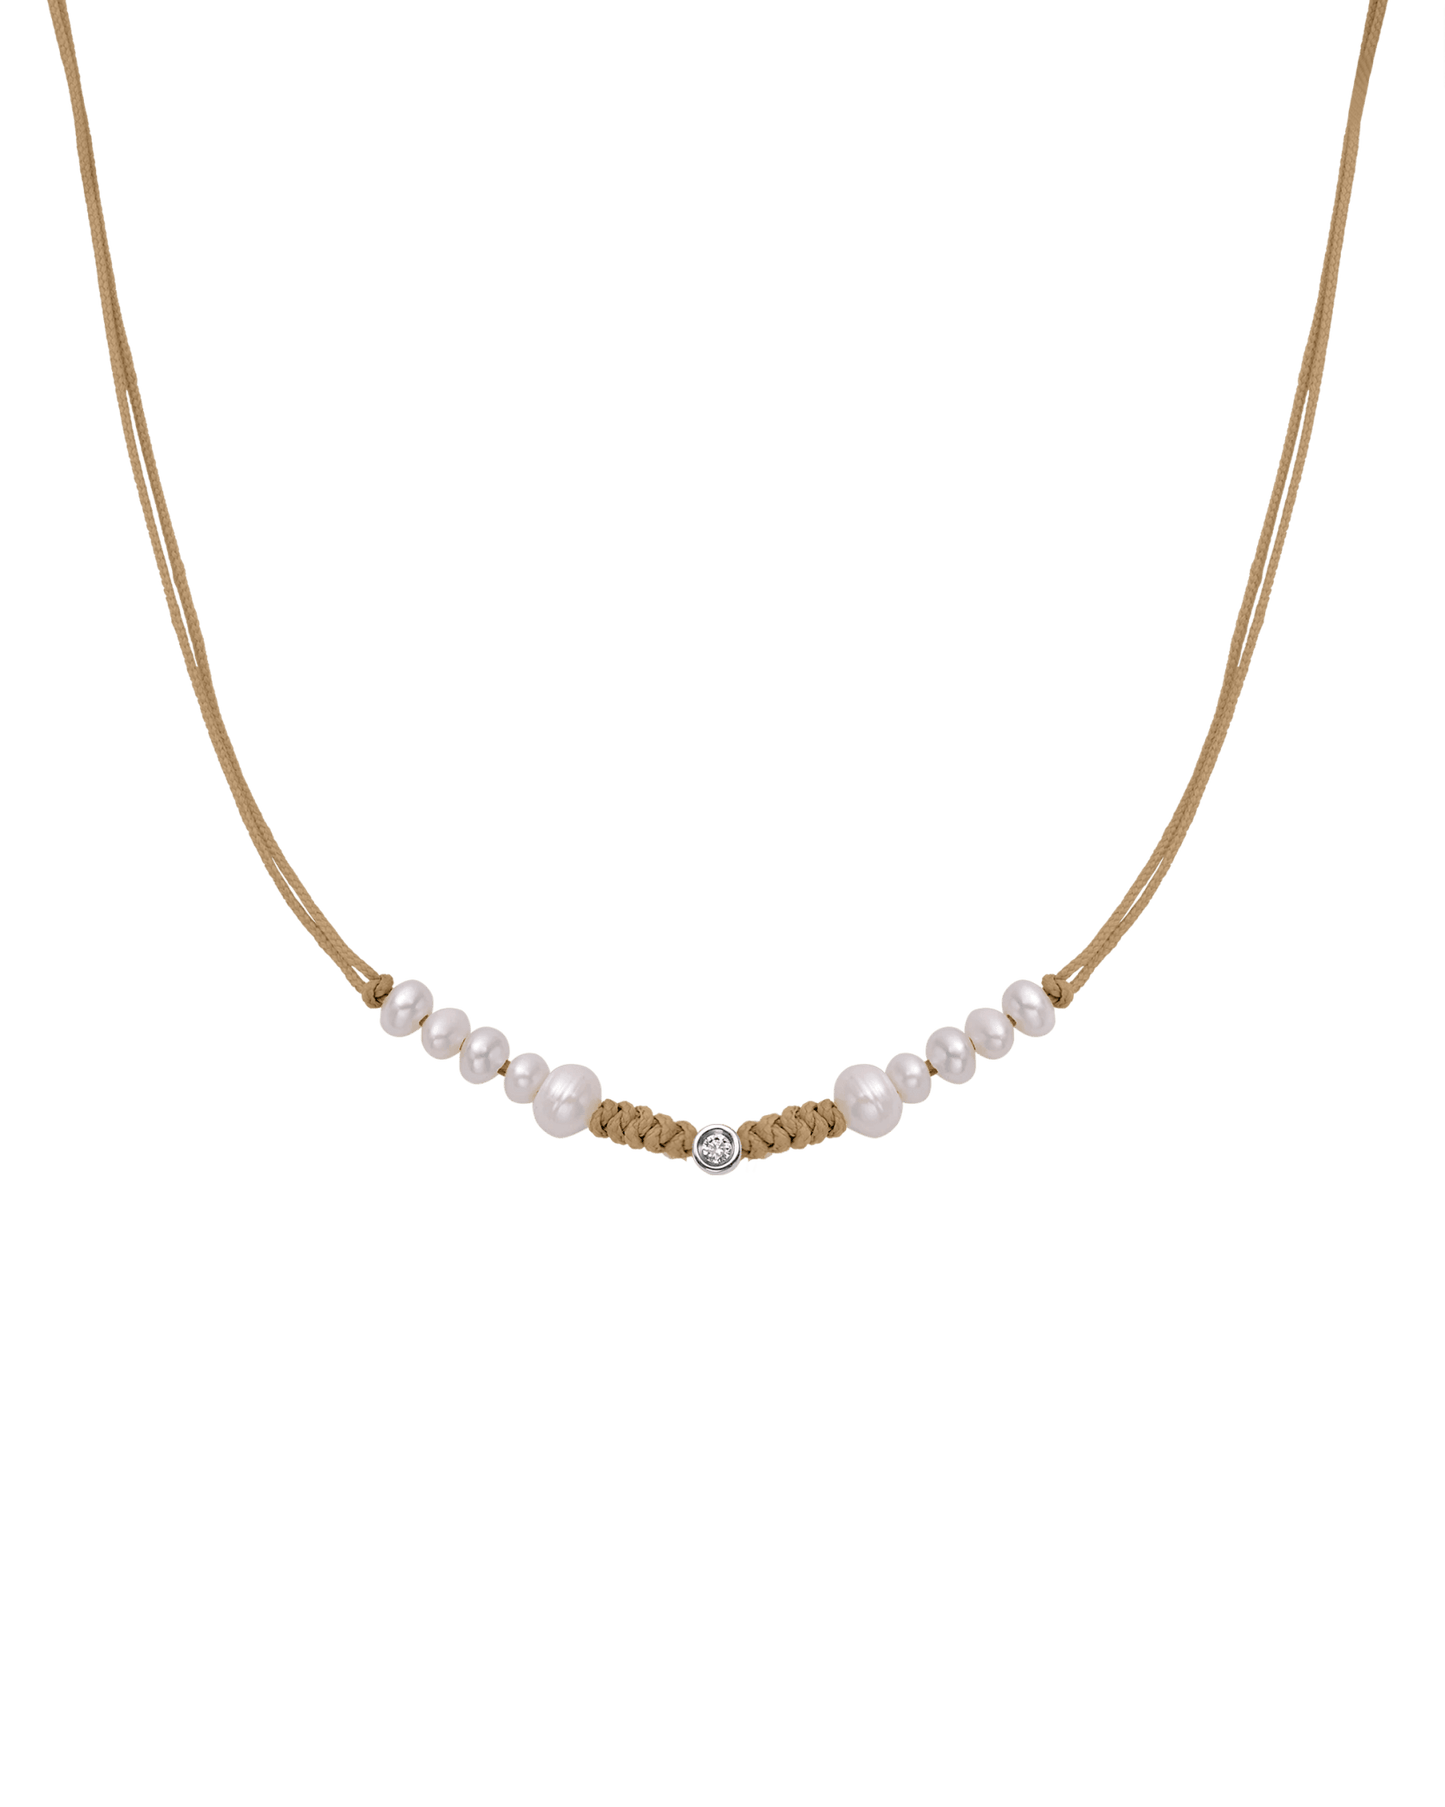 Ten Natural Pearl String of Love Necklace - 14K White Gold Necklaces 14K Solid Gold Camel Small: 0.03ct 